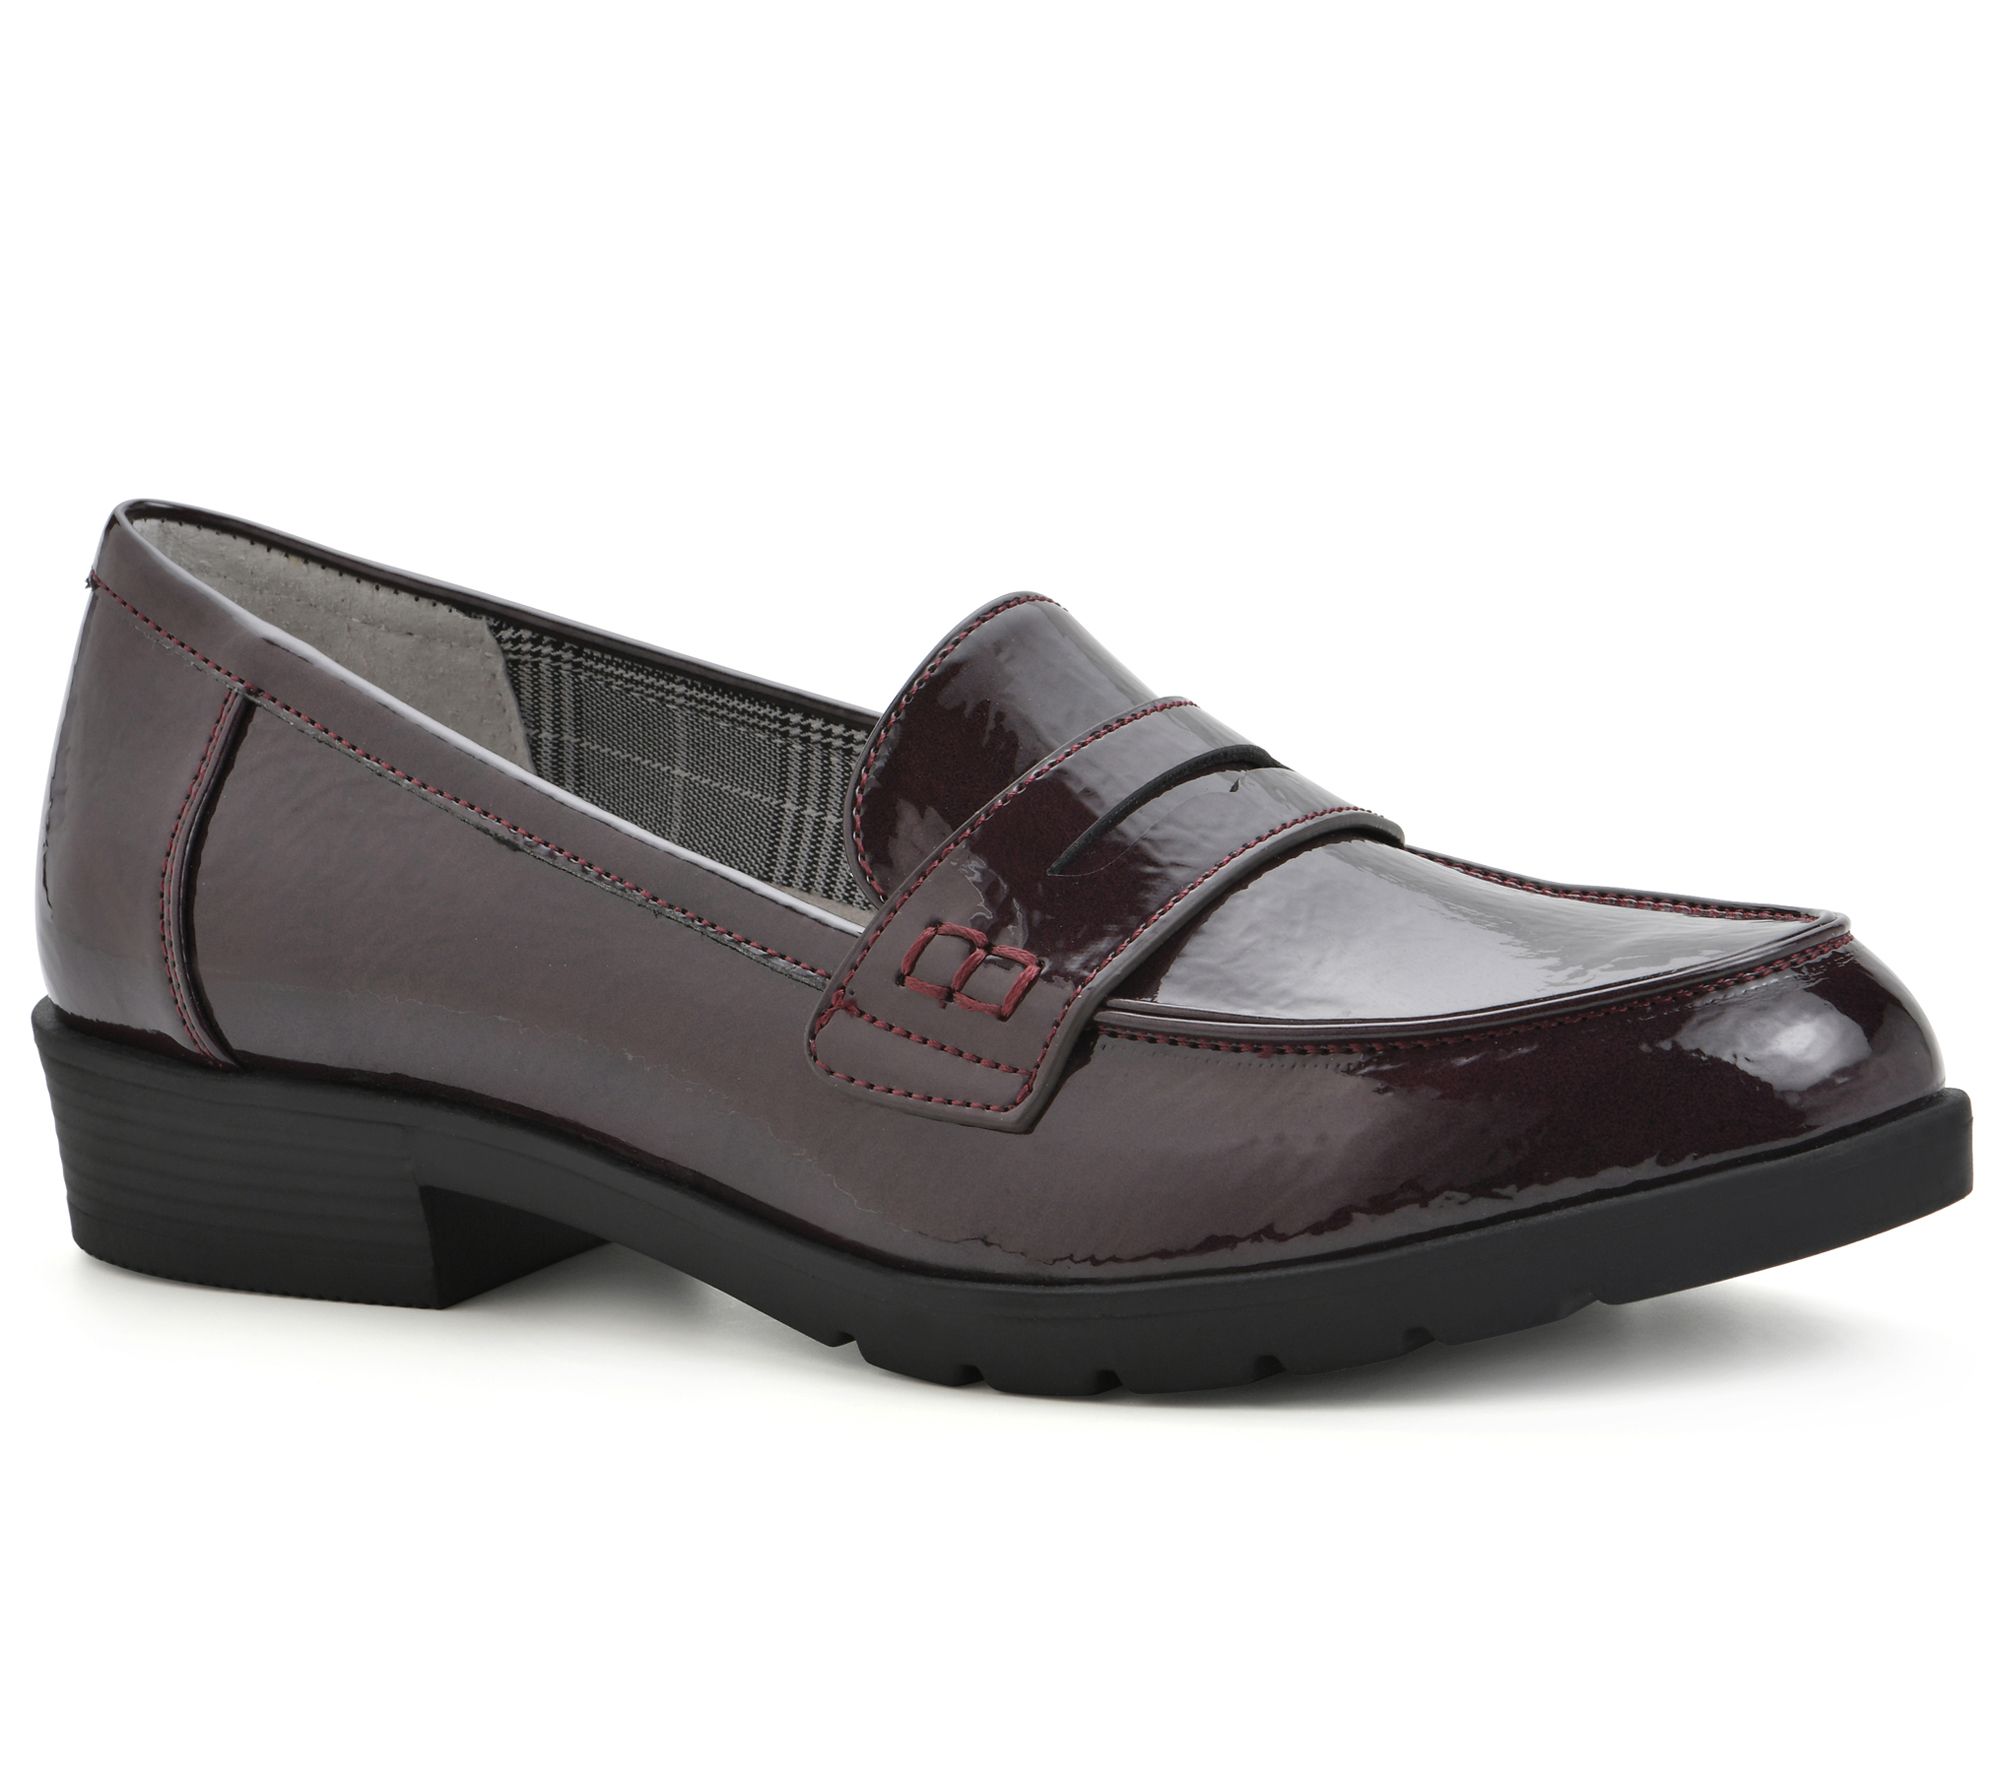 Cliffs by White Mountain Loafers - Galah - QVC.com